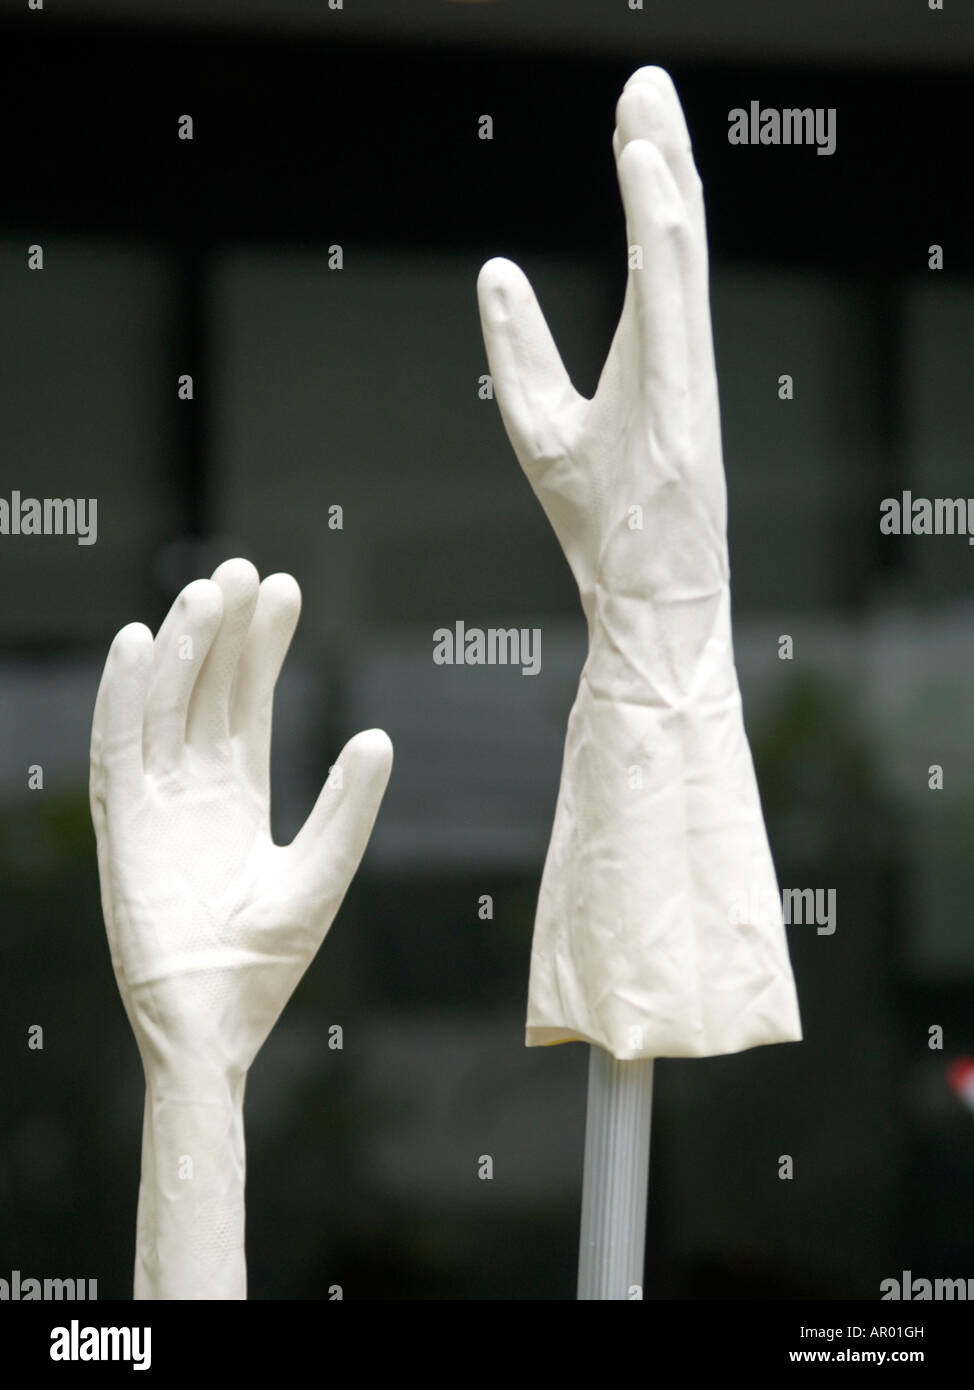 plastic janitor's gloves left on a mop handle Stock Photo